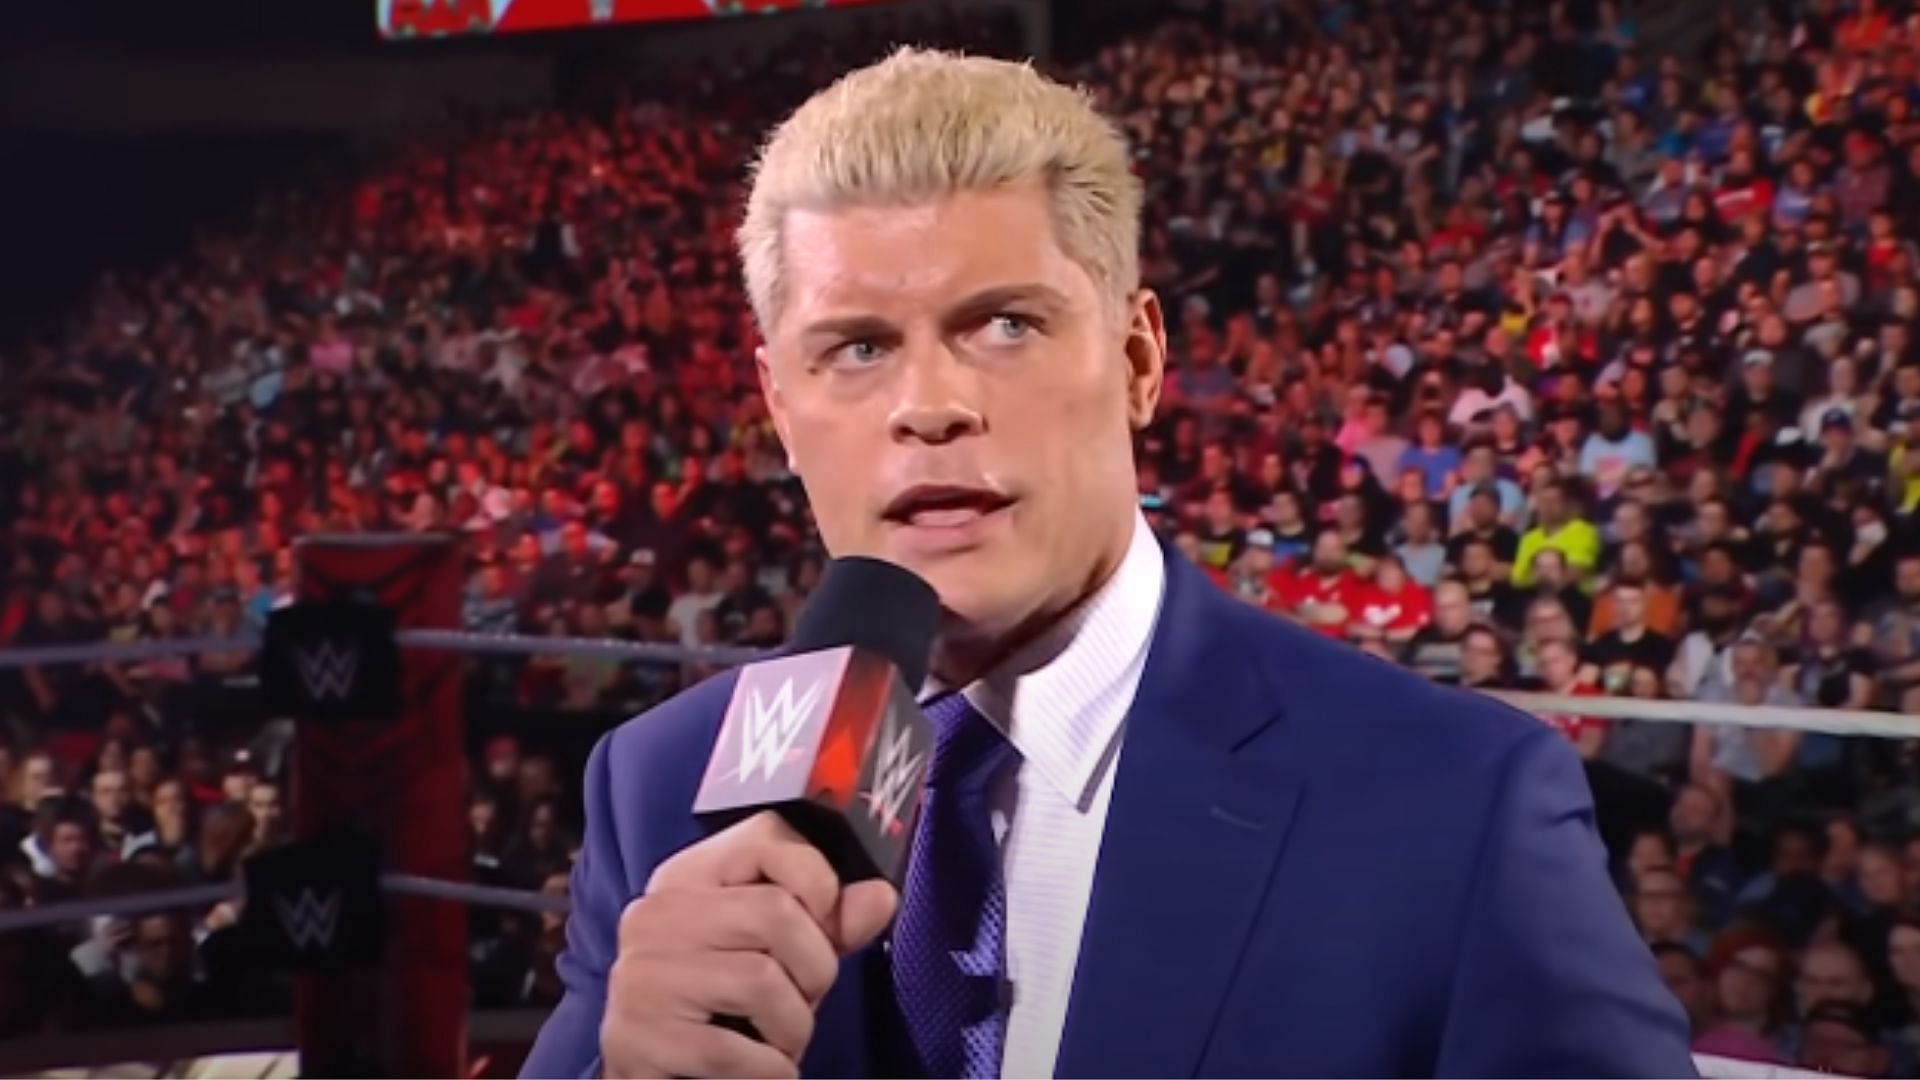 RAW Superstar Cody Rhodes has never held a WWE World Championship